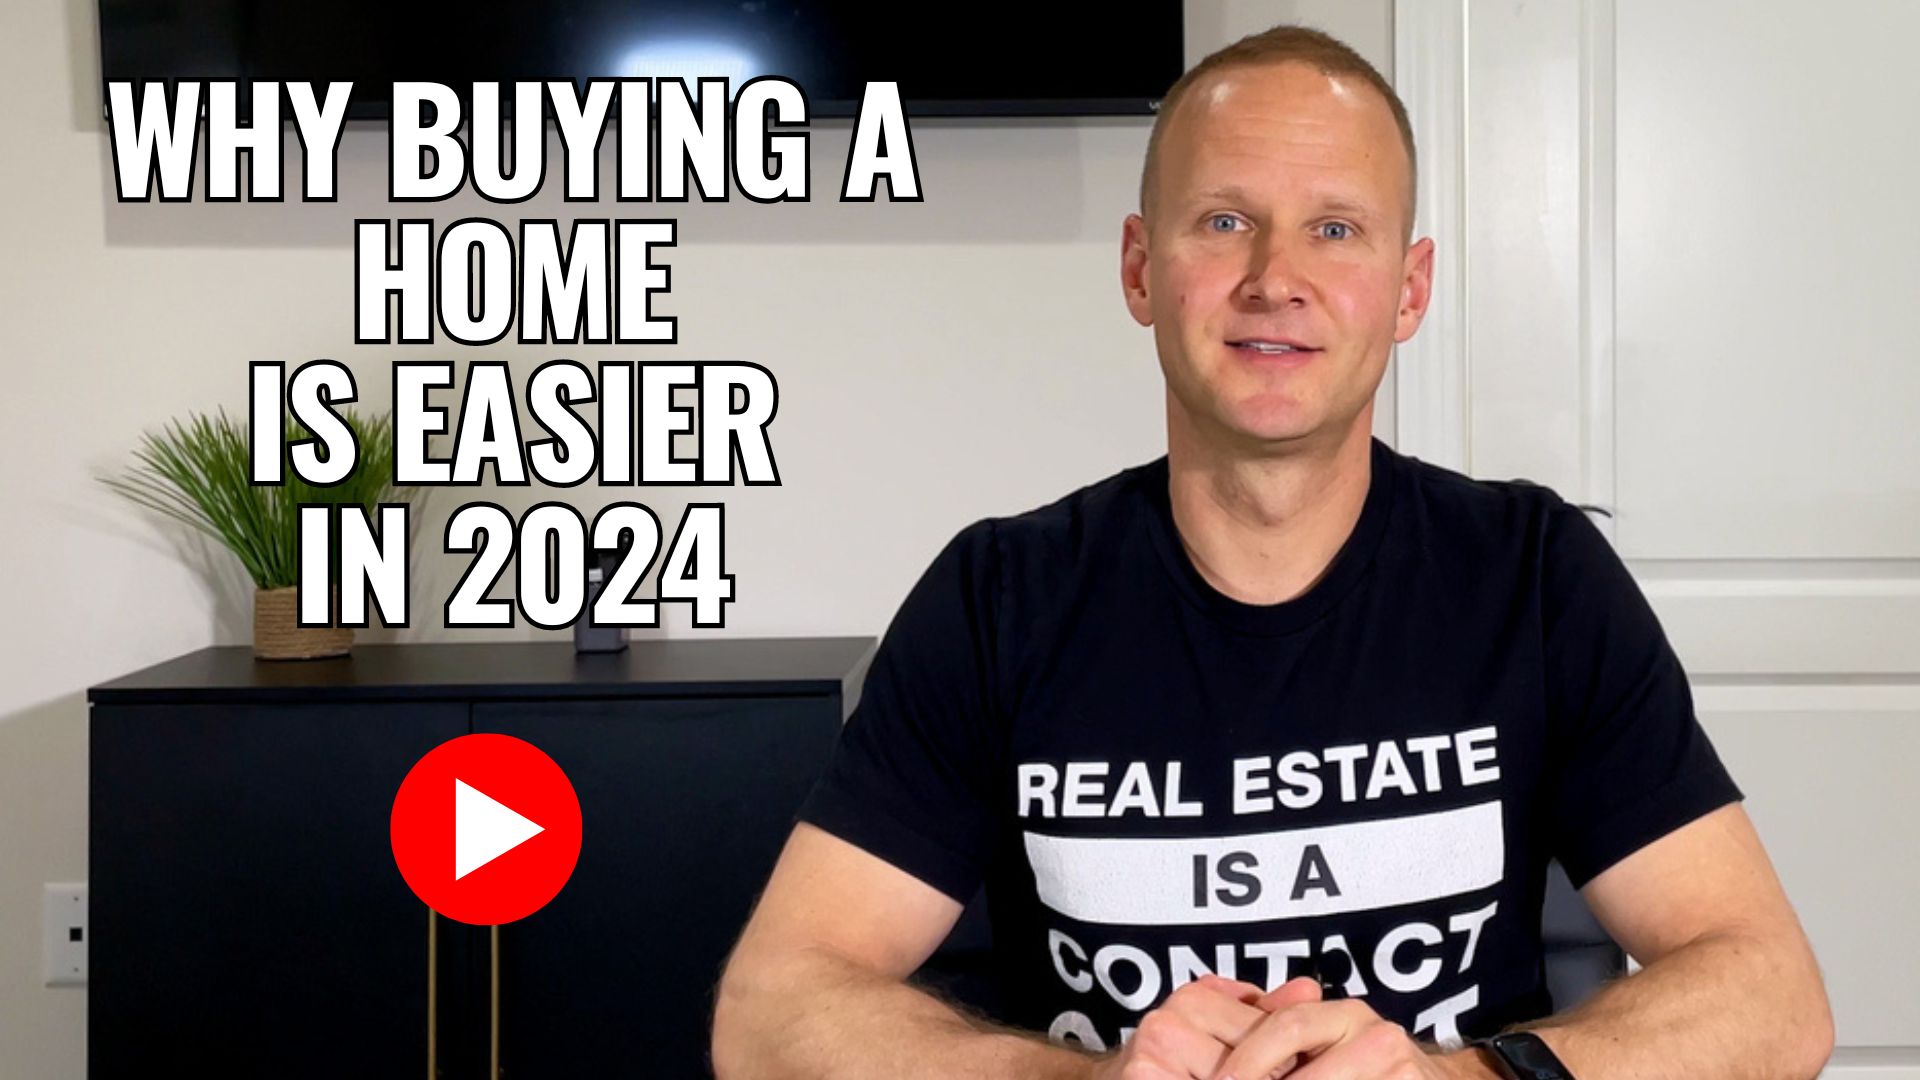 Buying a Home: Why Is It Easier Now?